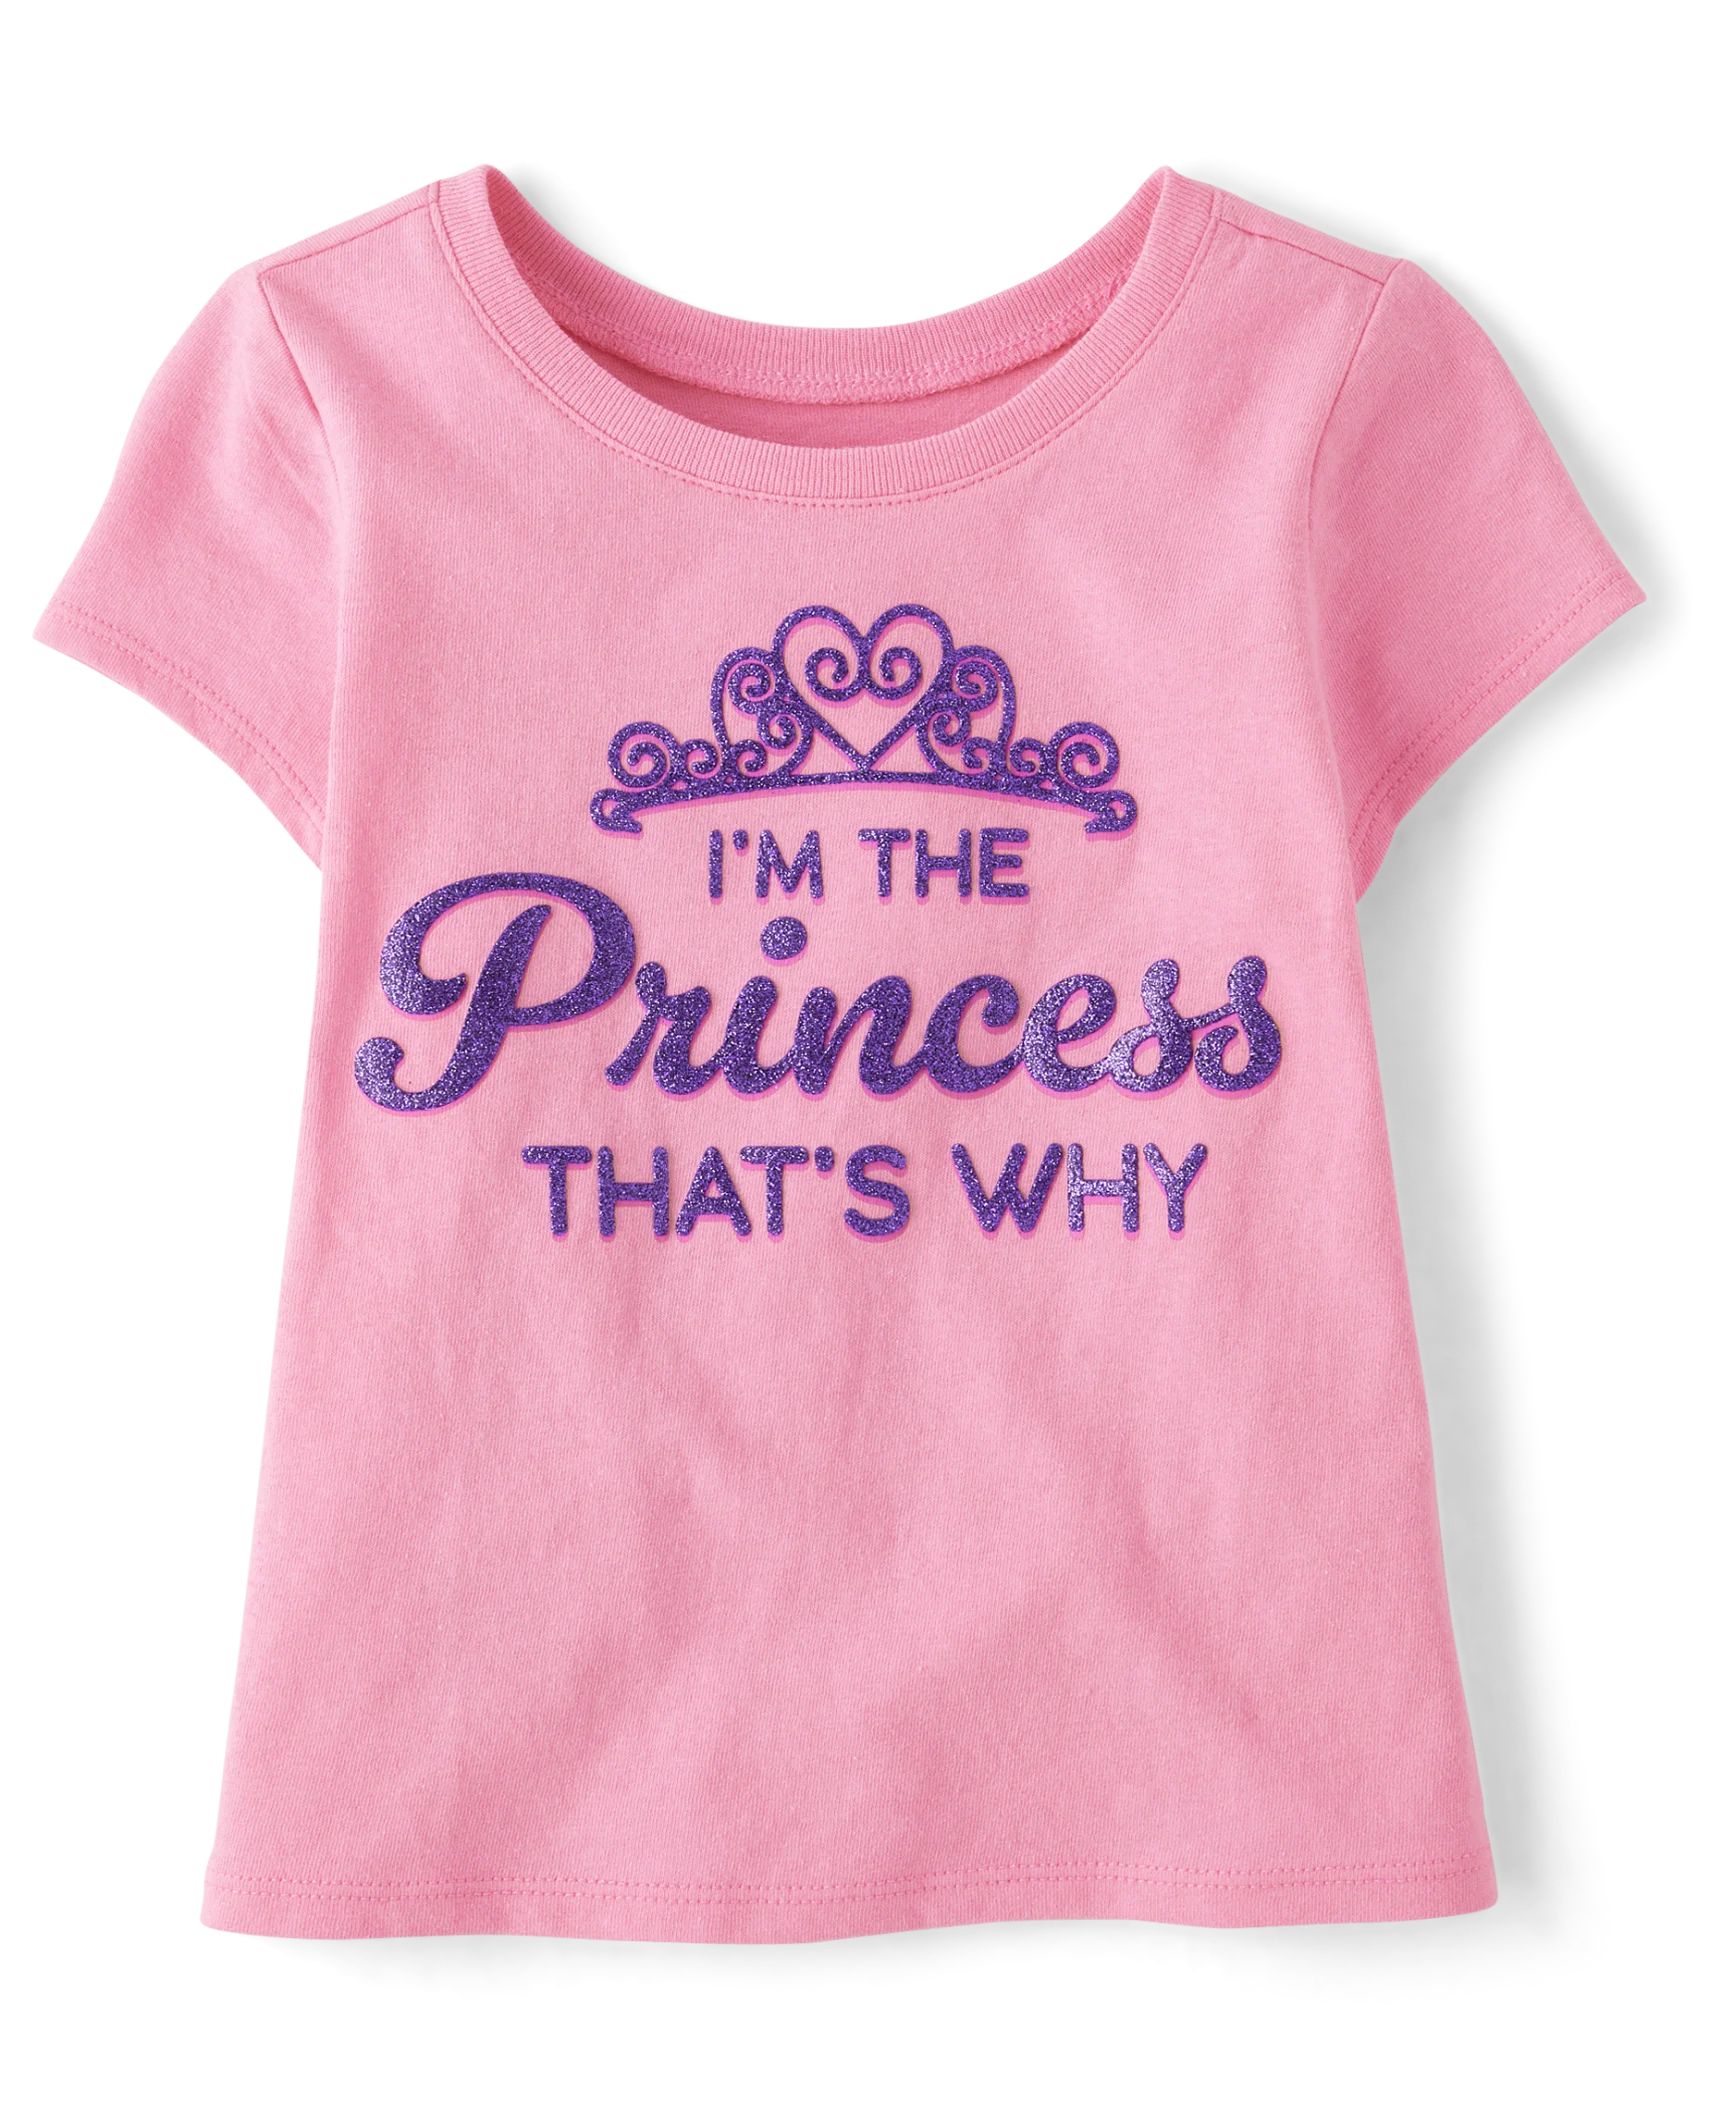 Baby And Toddler Girls Princess Graphic Tee - bright pink | The Children's Place